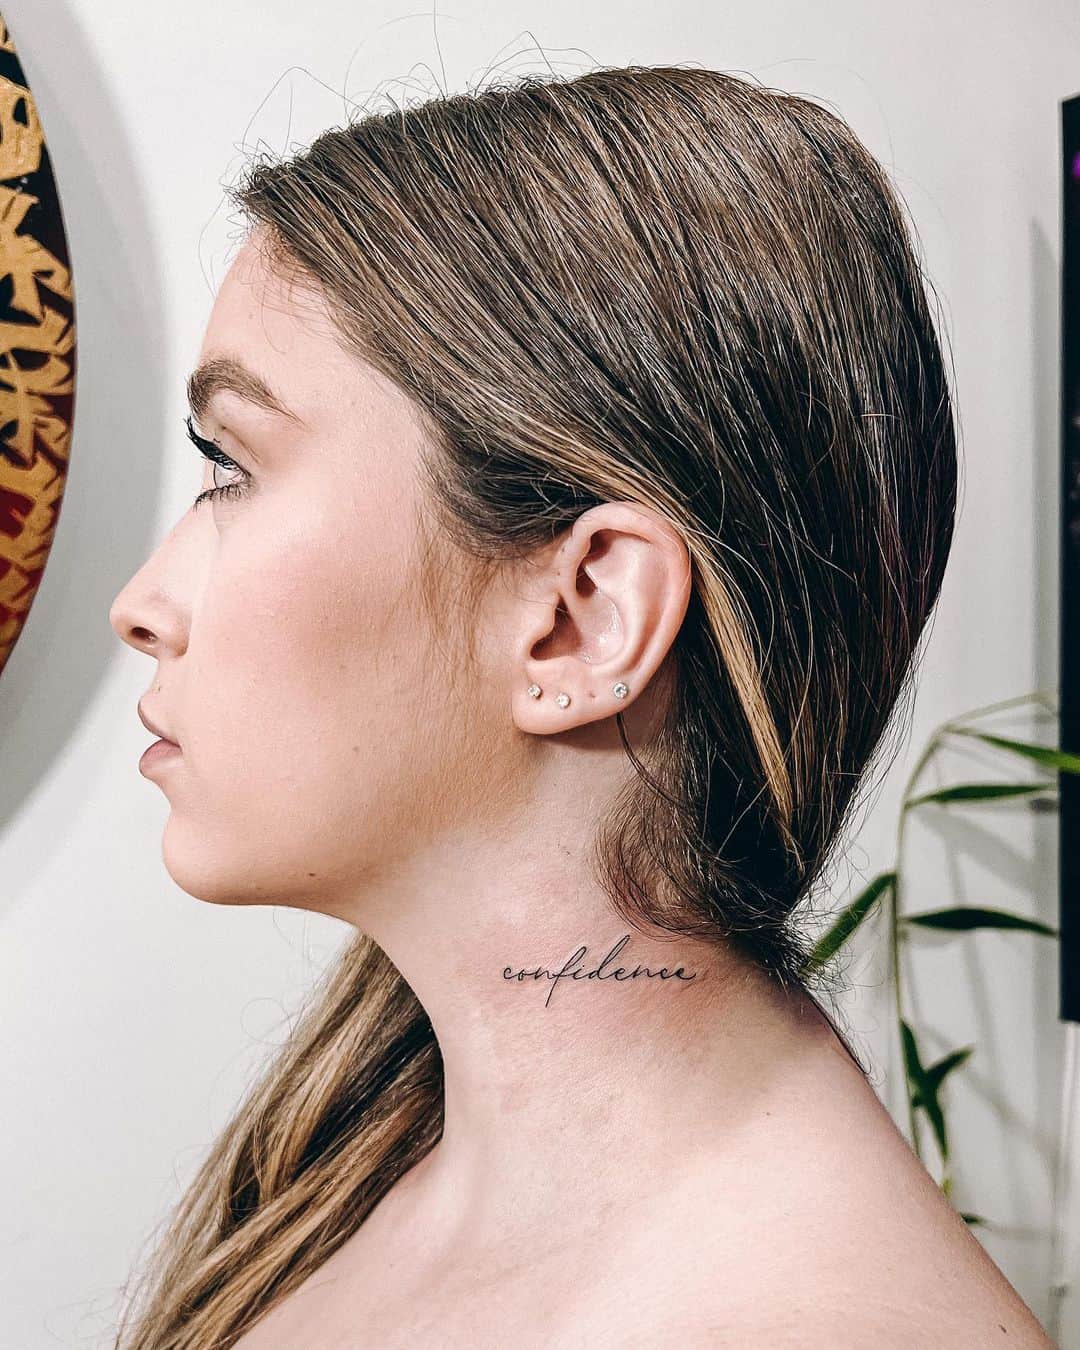 101 Best Throat Female Neck Tattoo Ideas That Will Blow Your Mind!